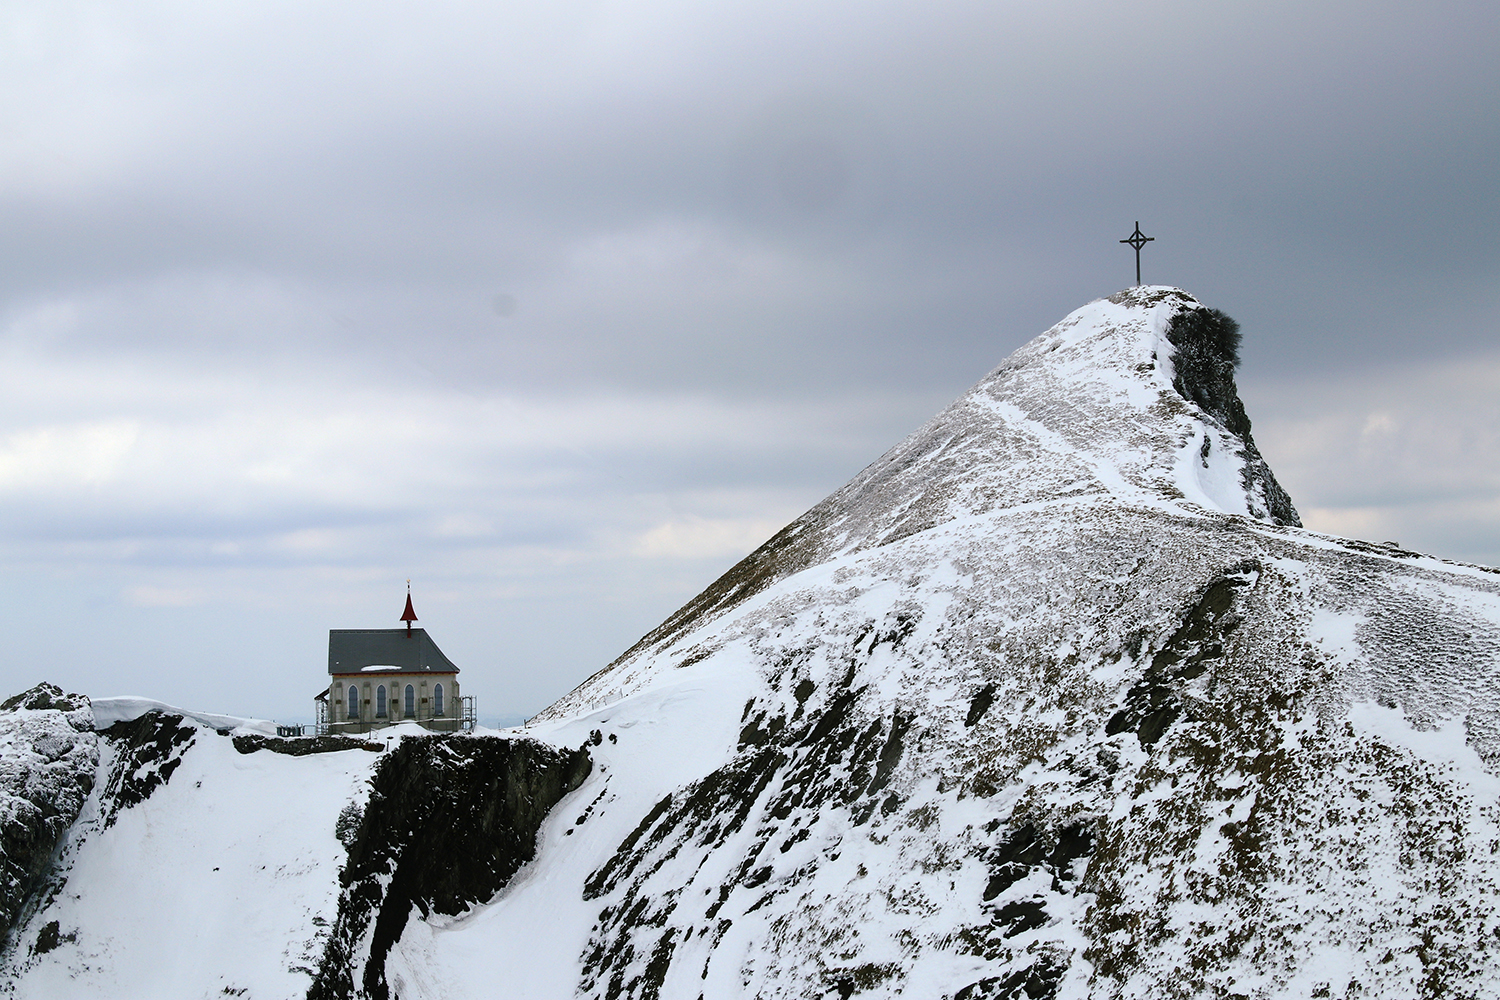 Landscape shot of snow covered mountains with a church and an cross